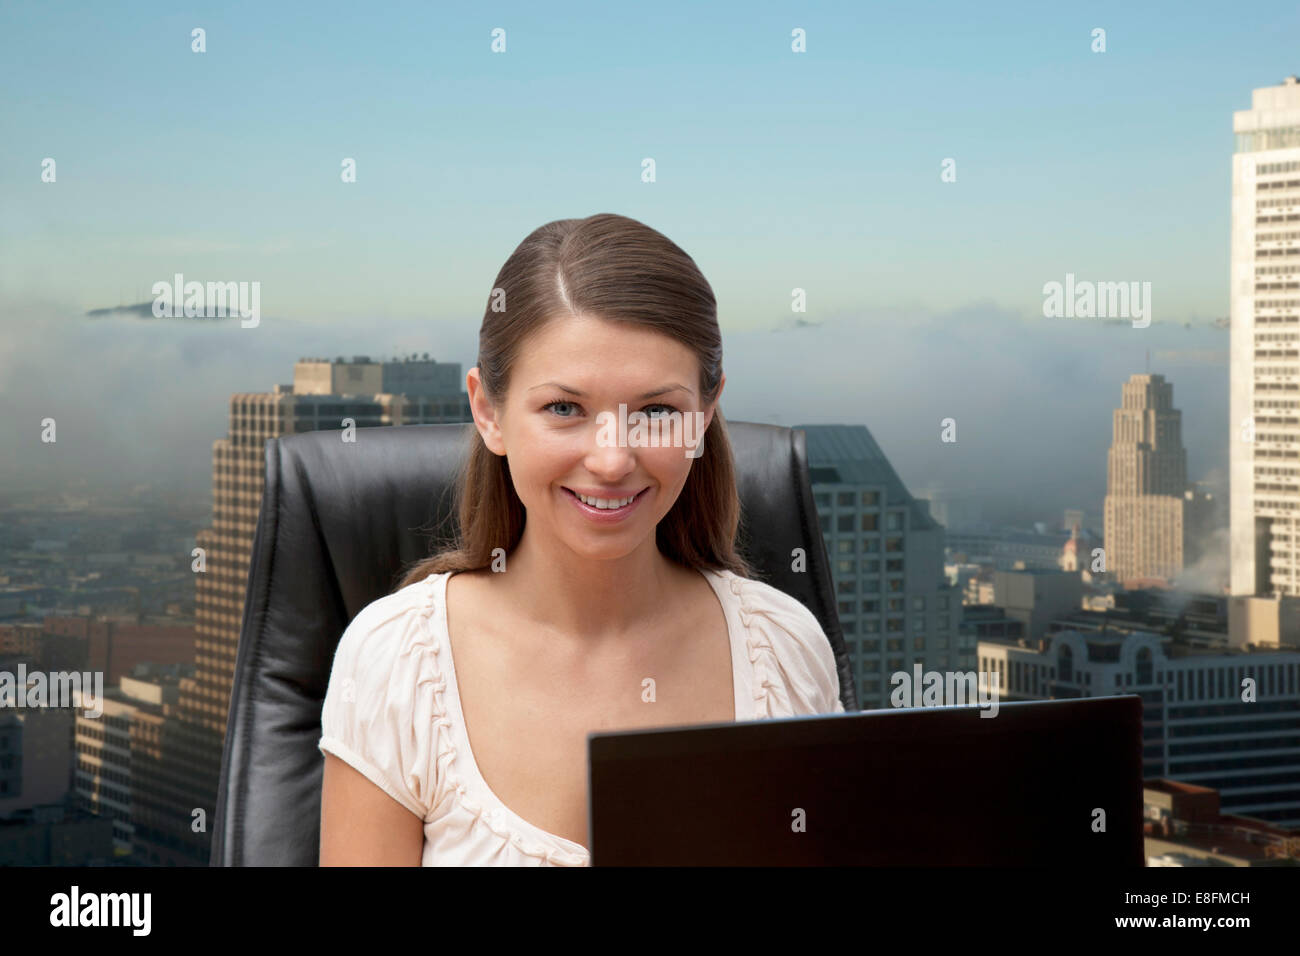 Portrait of young businesswoman in office with office buildings in background Stock Photo